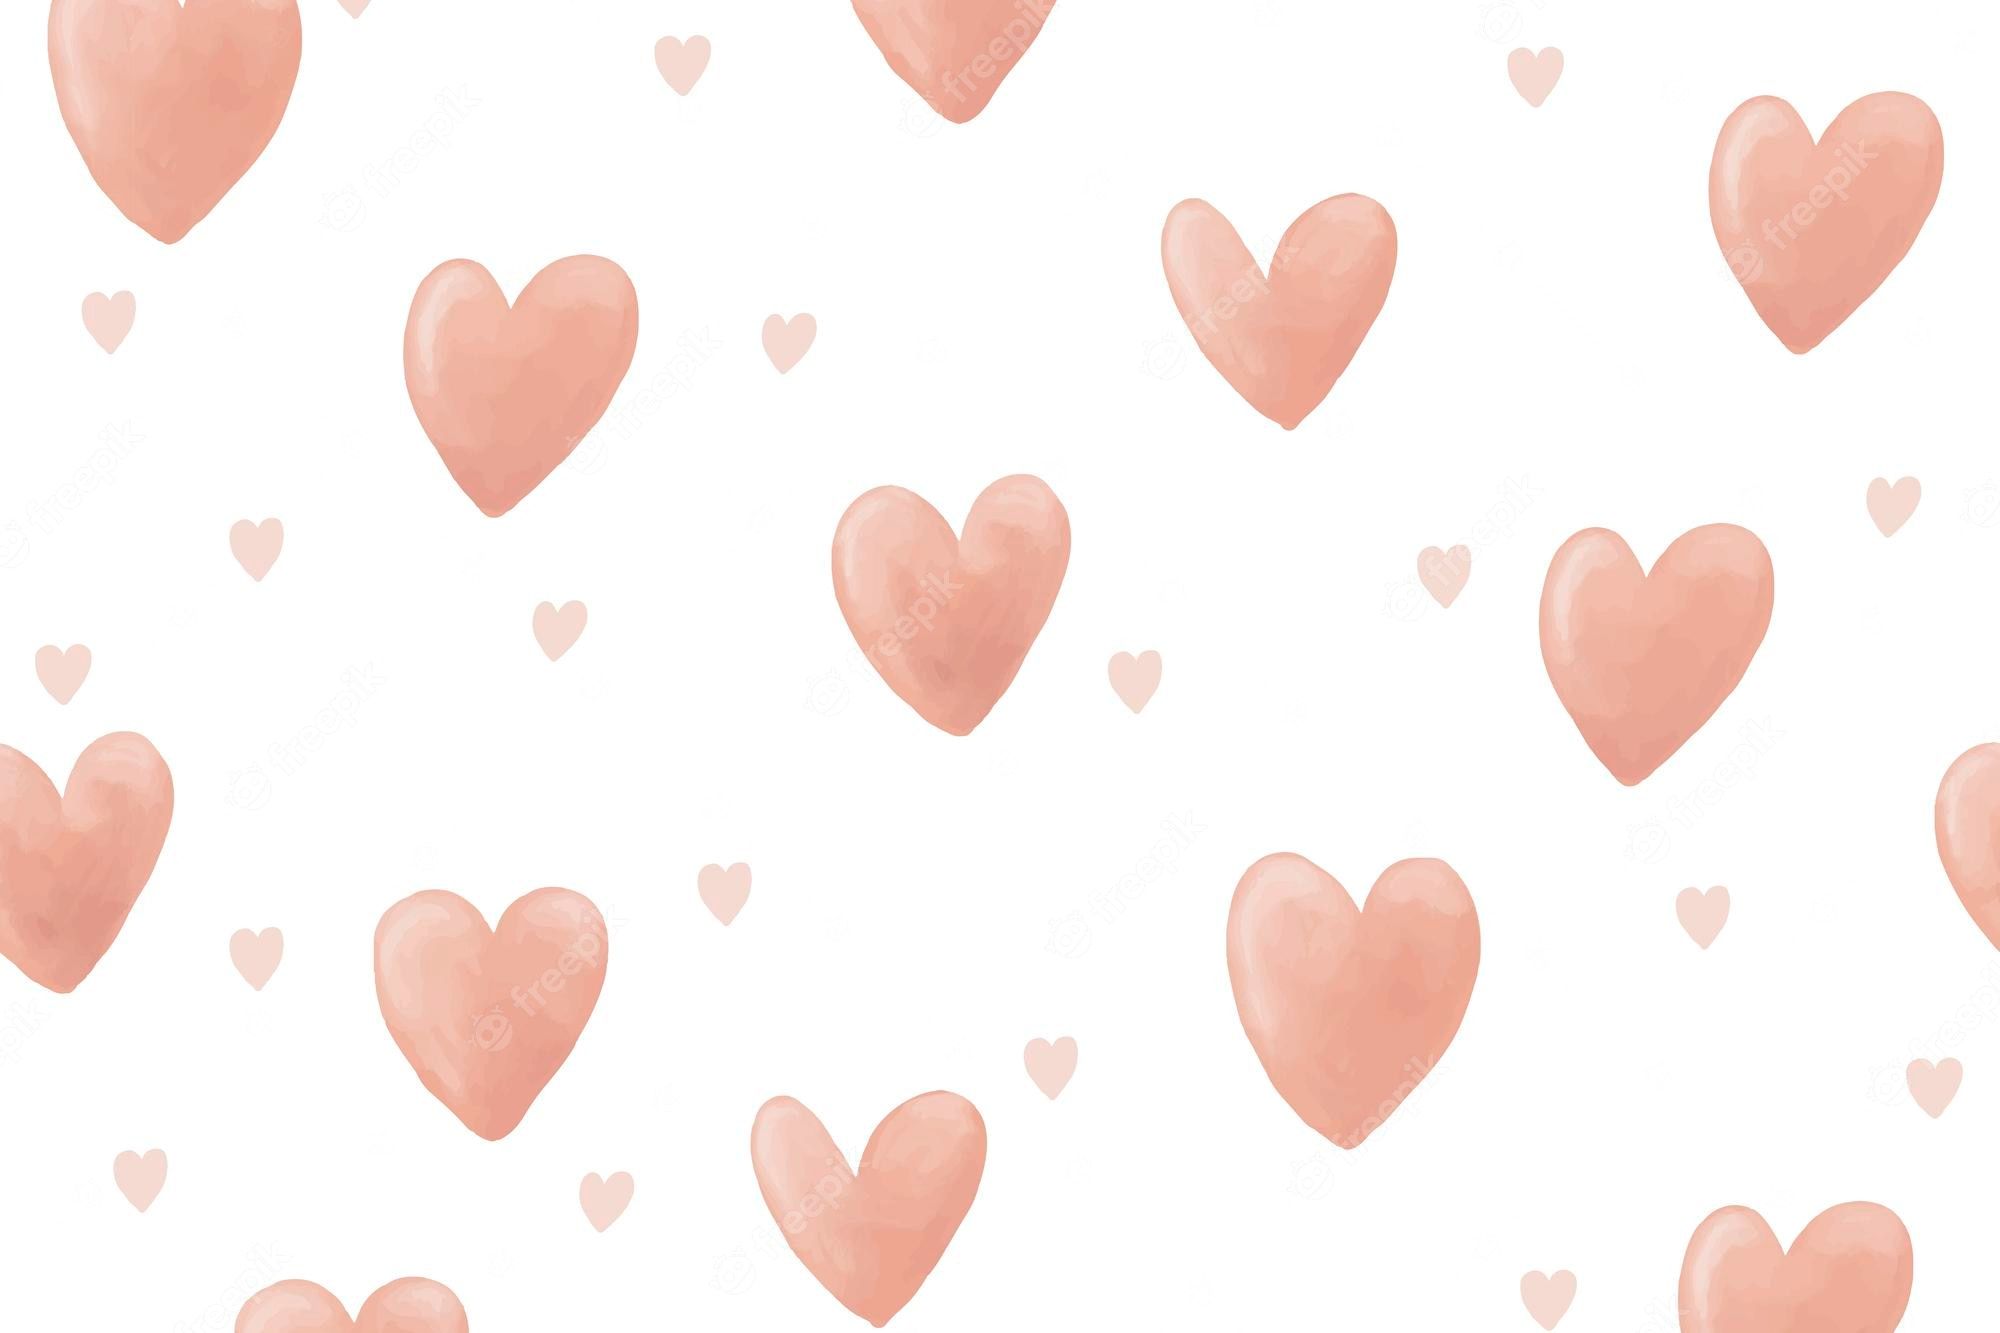 A watercolor pattern of pink hearts on a white background - Pink heart, heart